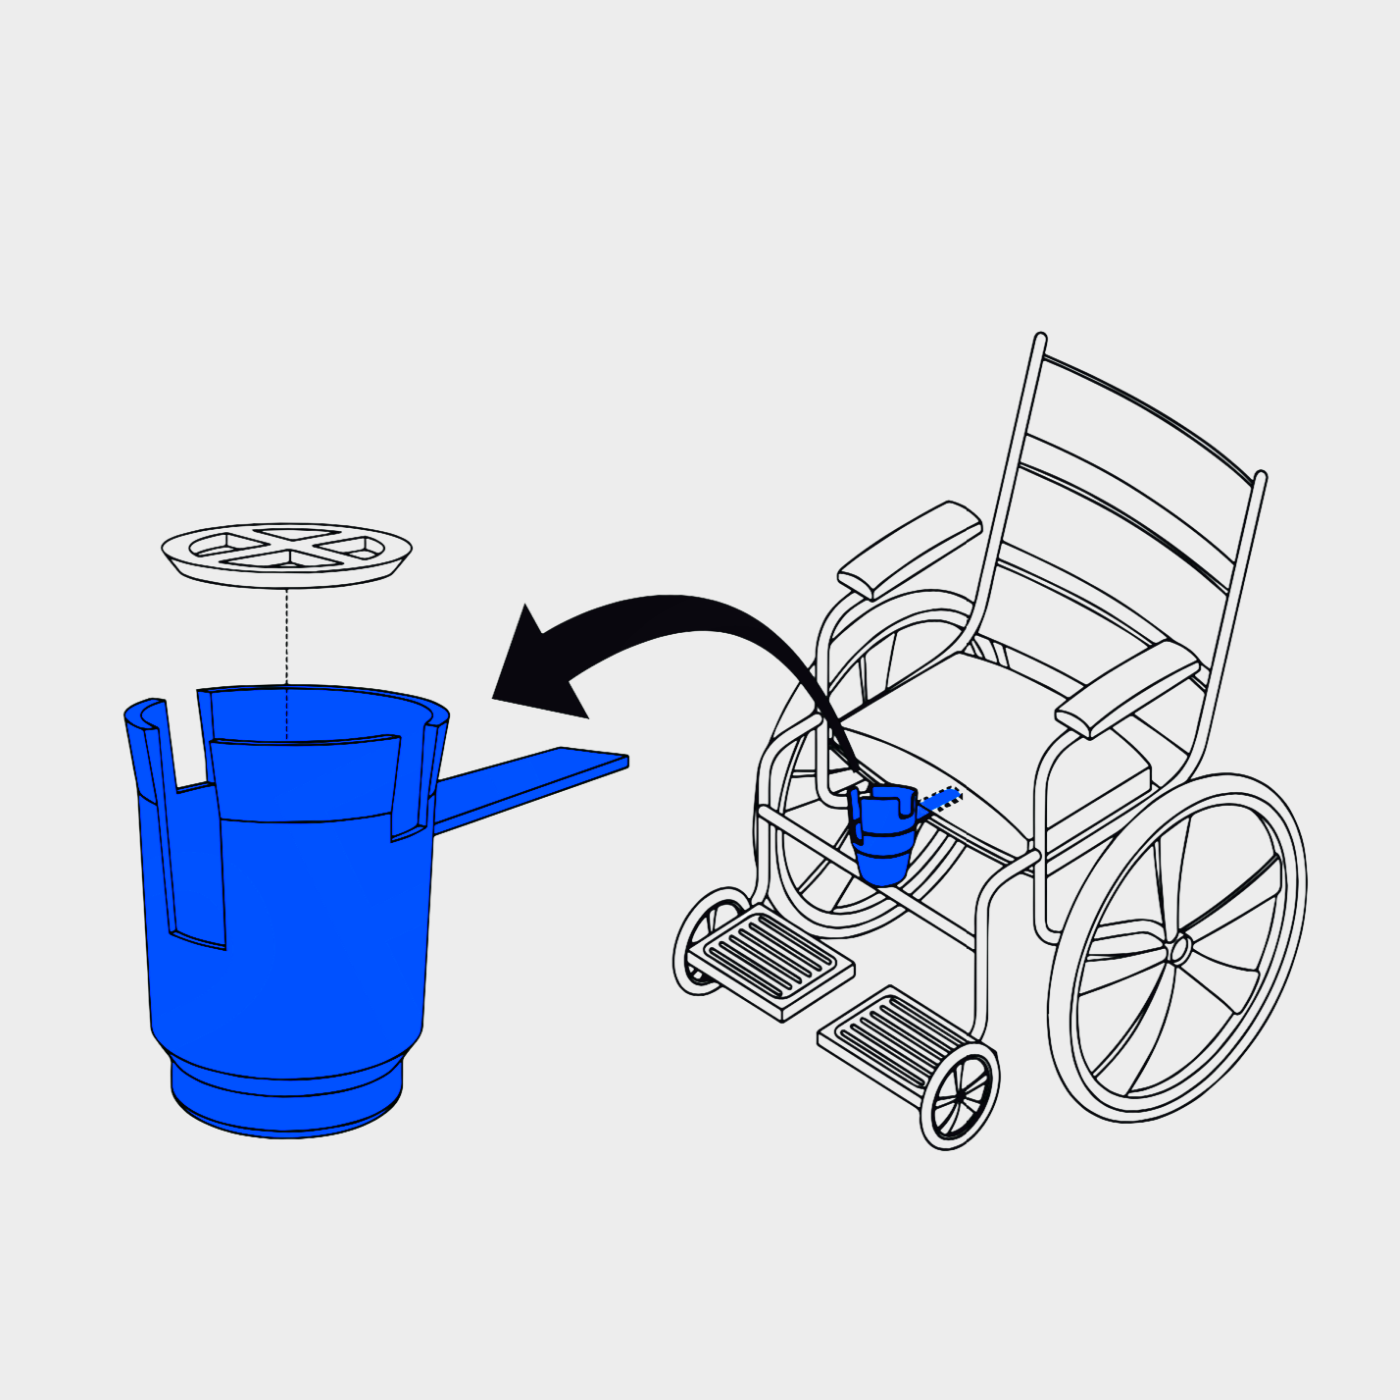 Handicup line drawing. Insert the arm of the HandiCup under the seat cushion of your wheelchair to safely install.